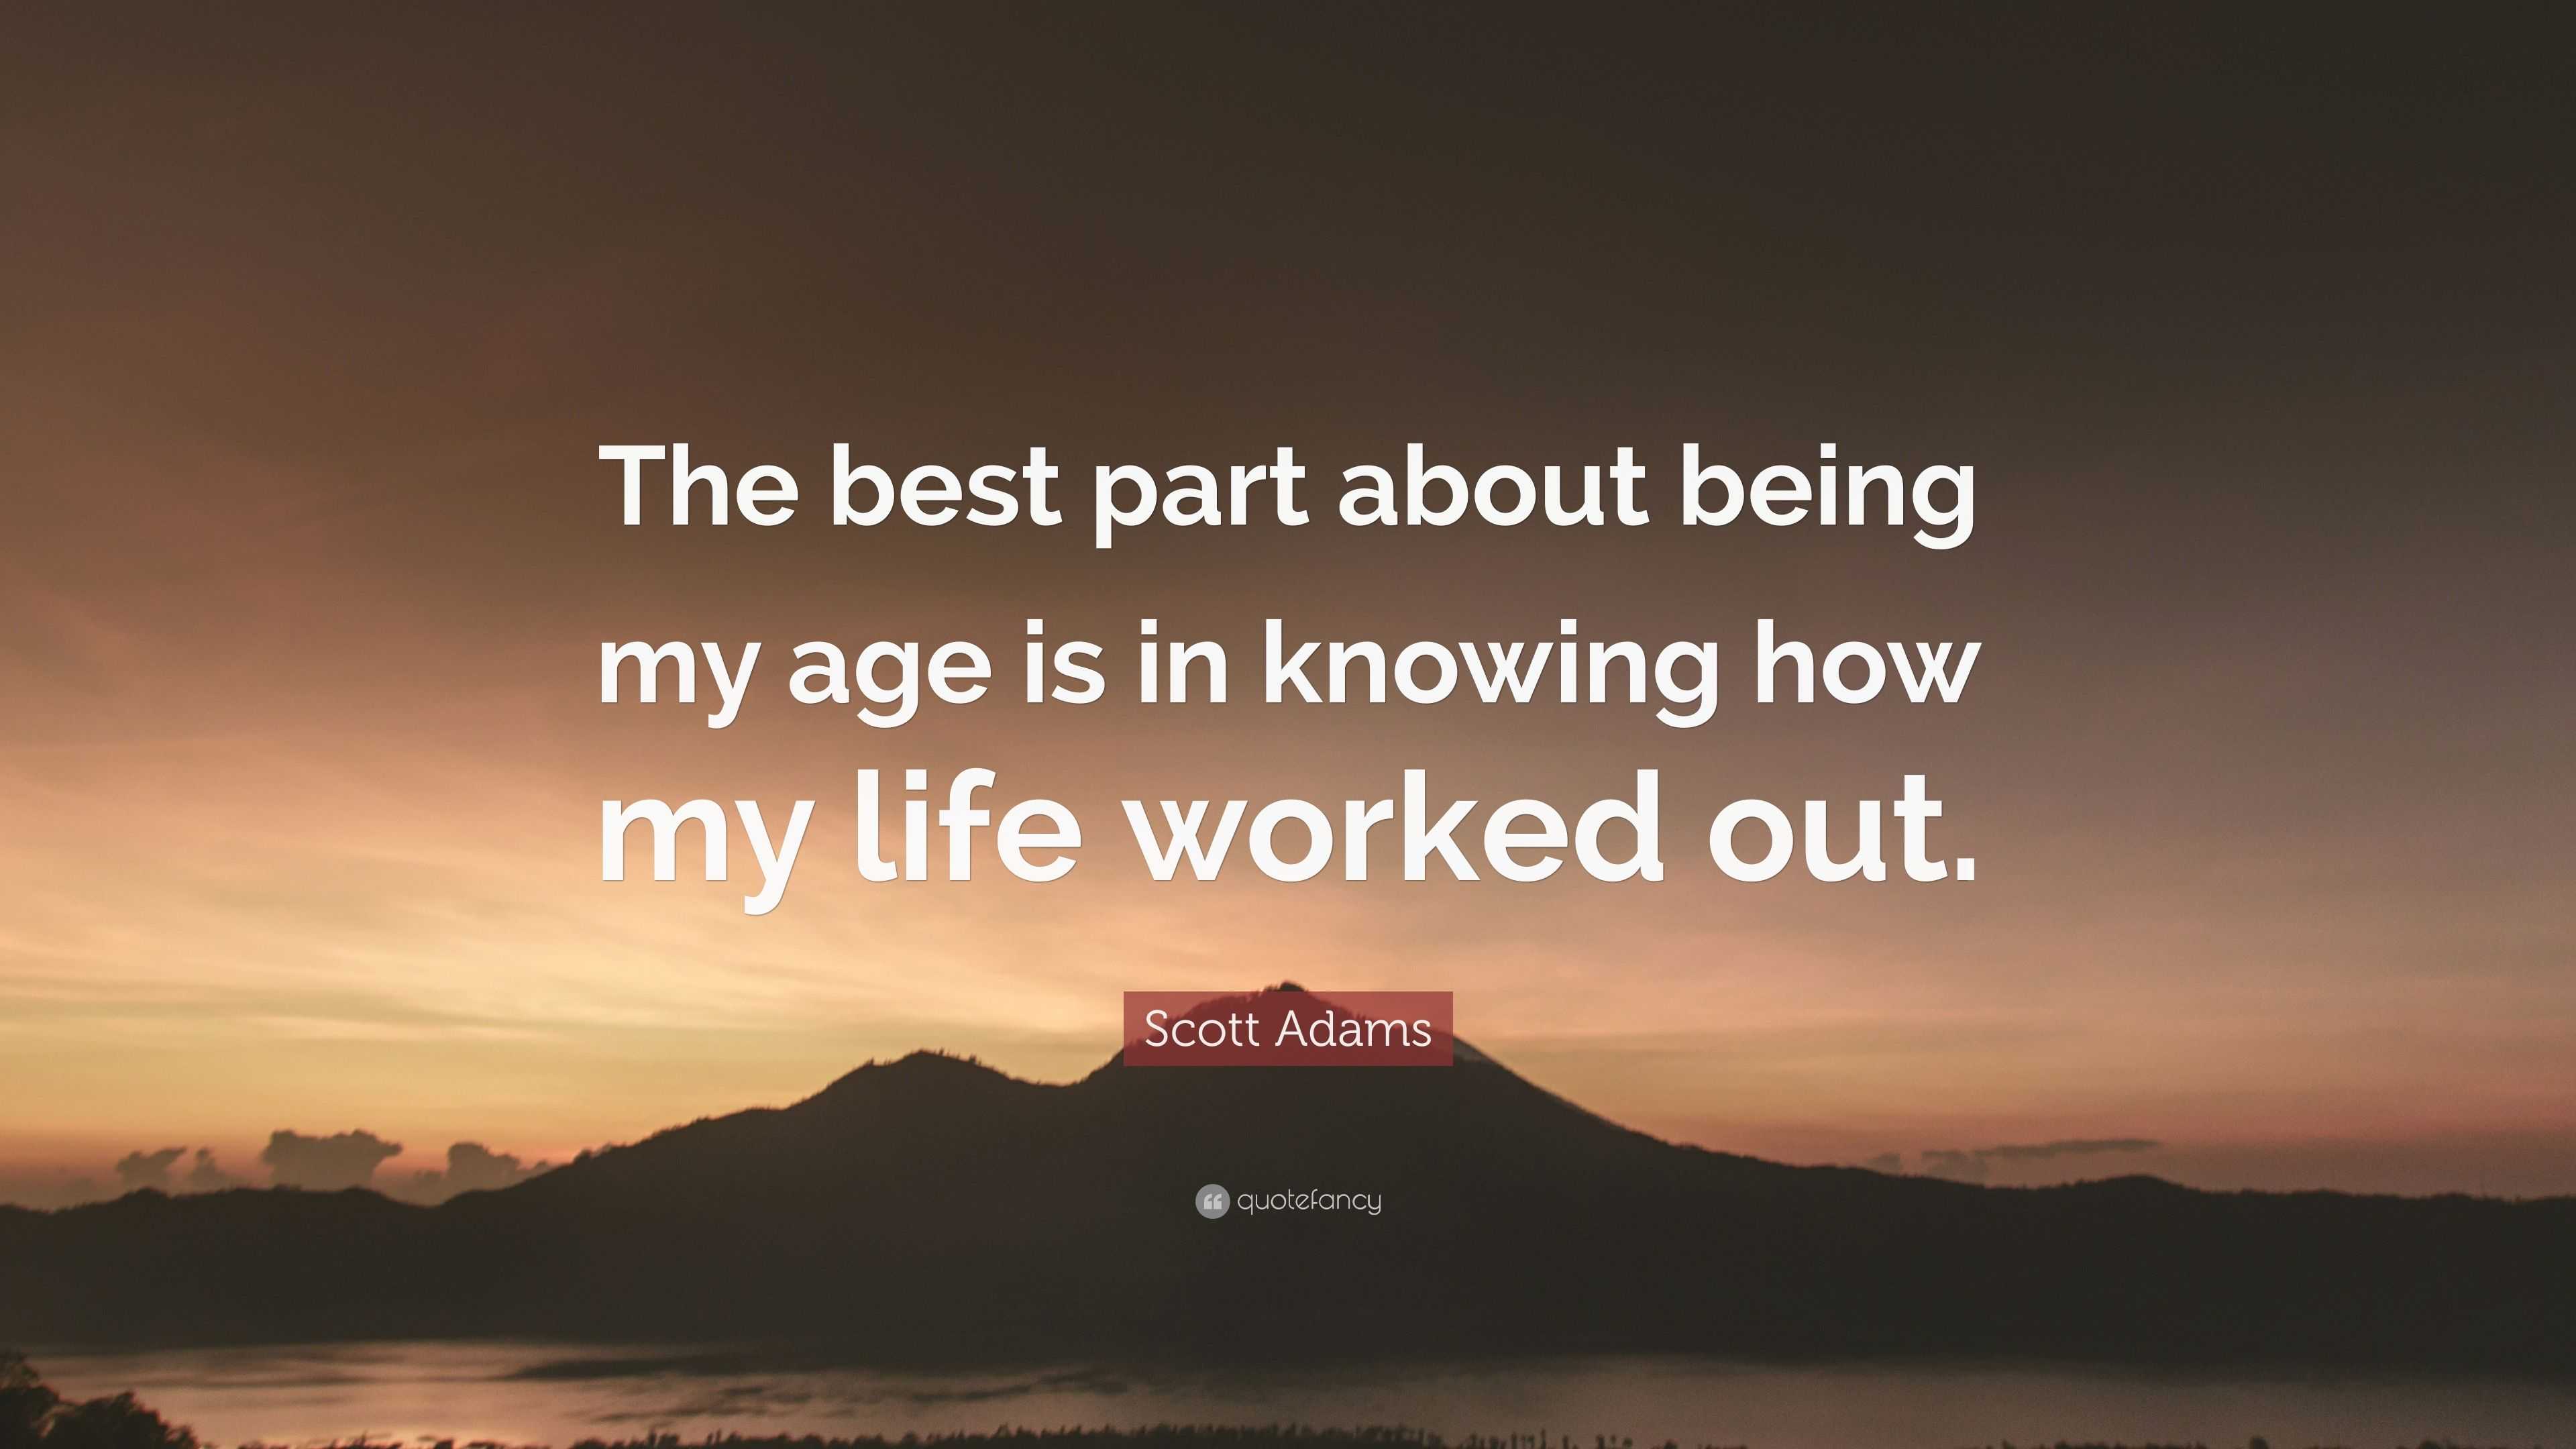 Scott Adams Quote “The best part about being my age is in knowing how